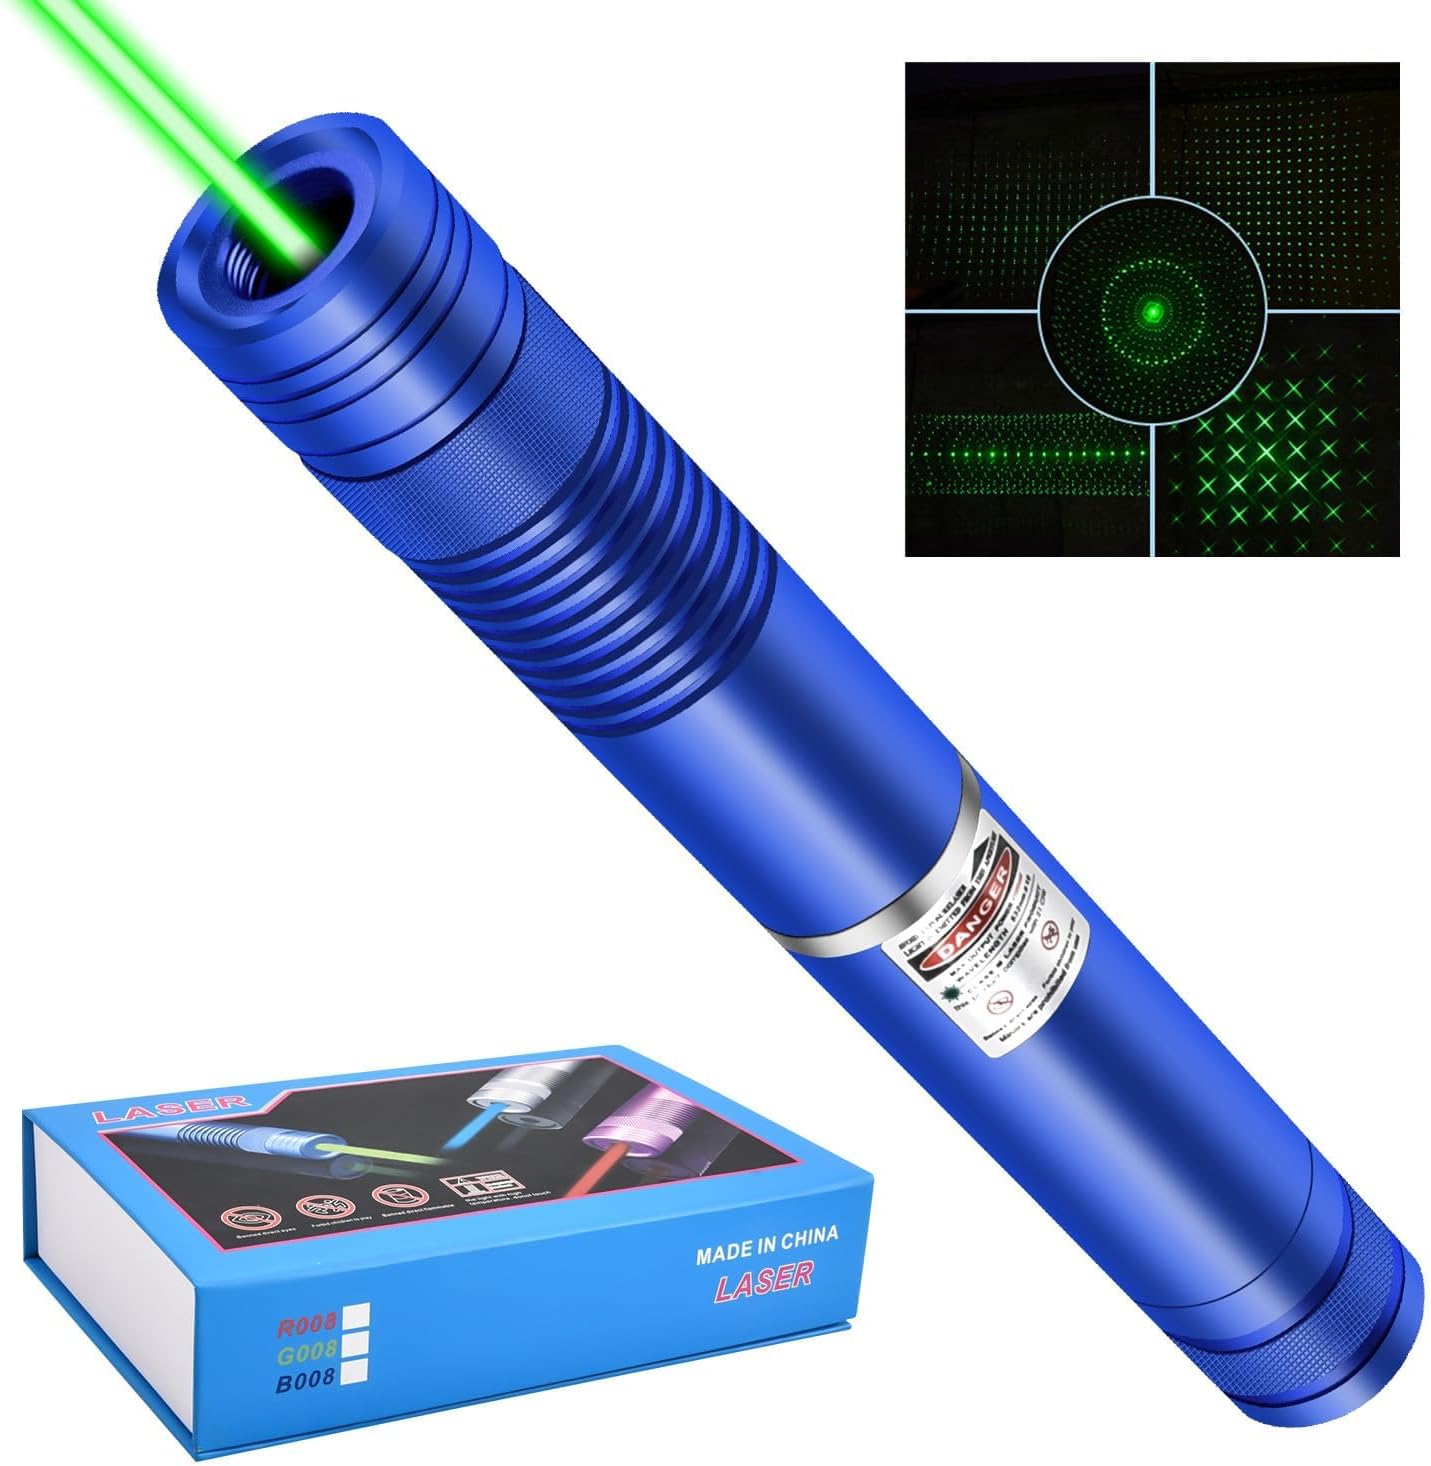 Long Range Green Beam High Power Flashligh with USB Charging, High Power Burning  Laser Pointer for Night Astronomy Outdoor Camping Hunting and Hiking 